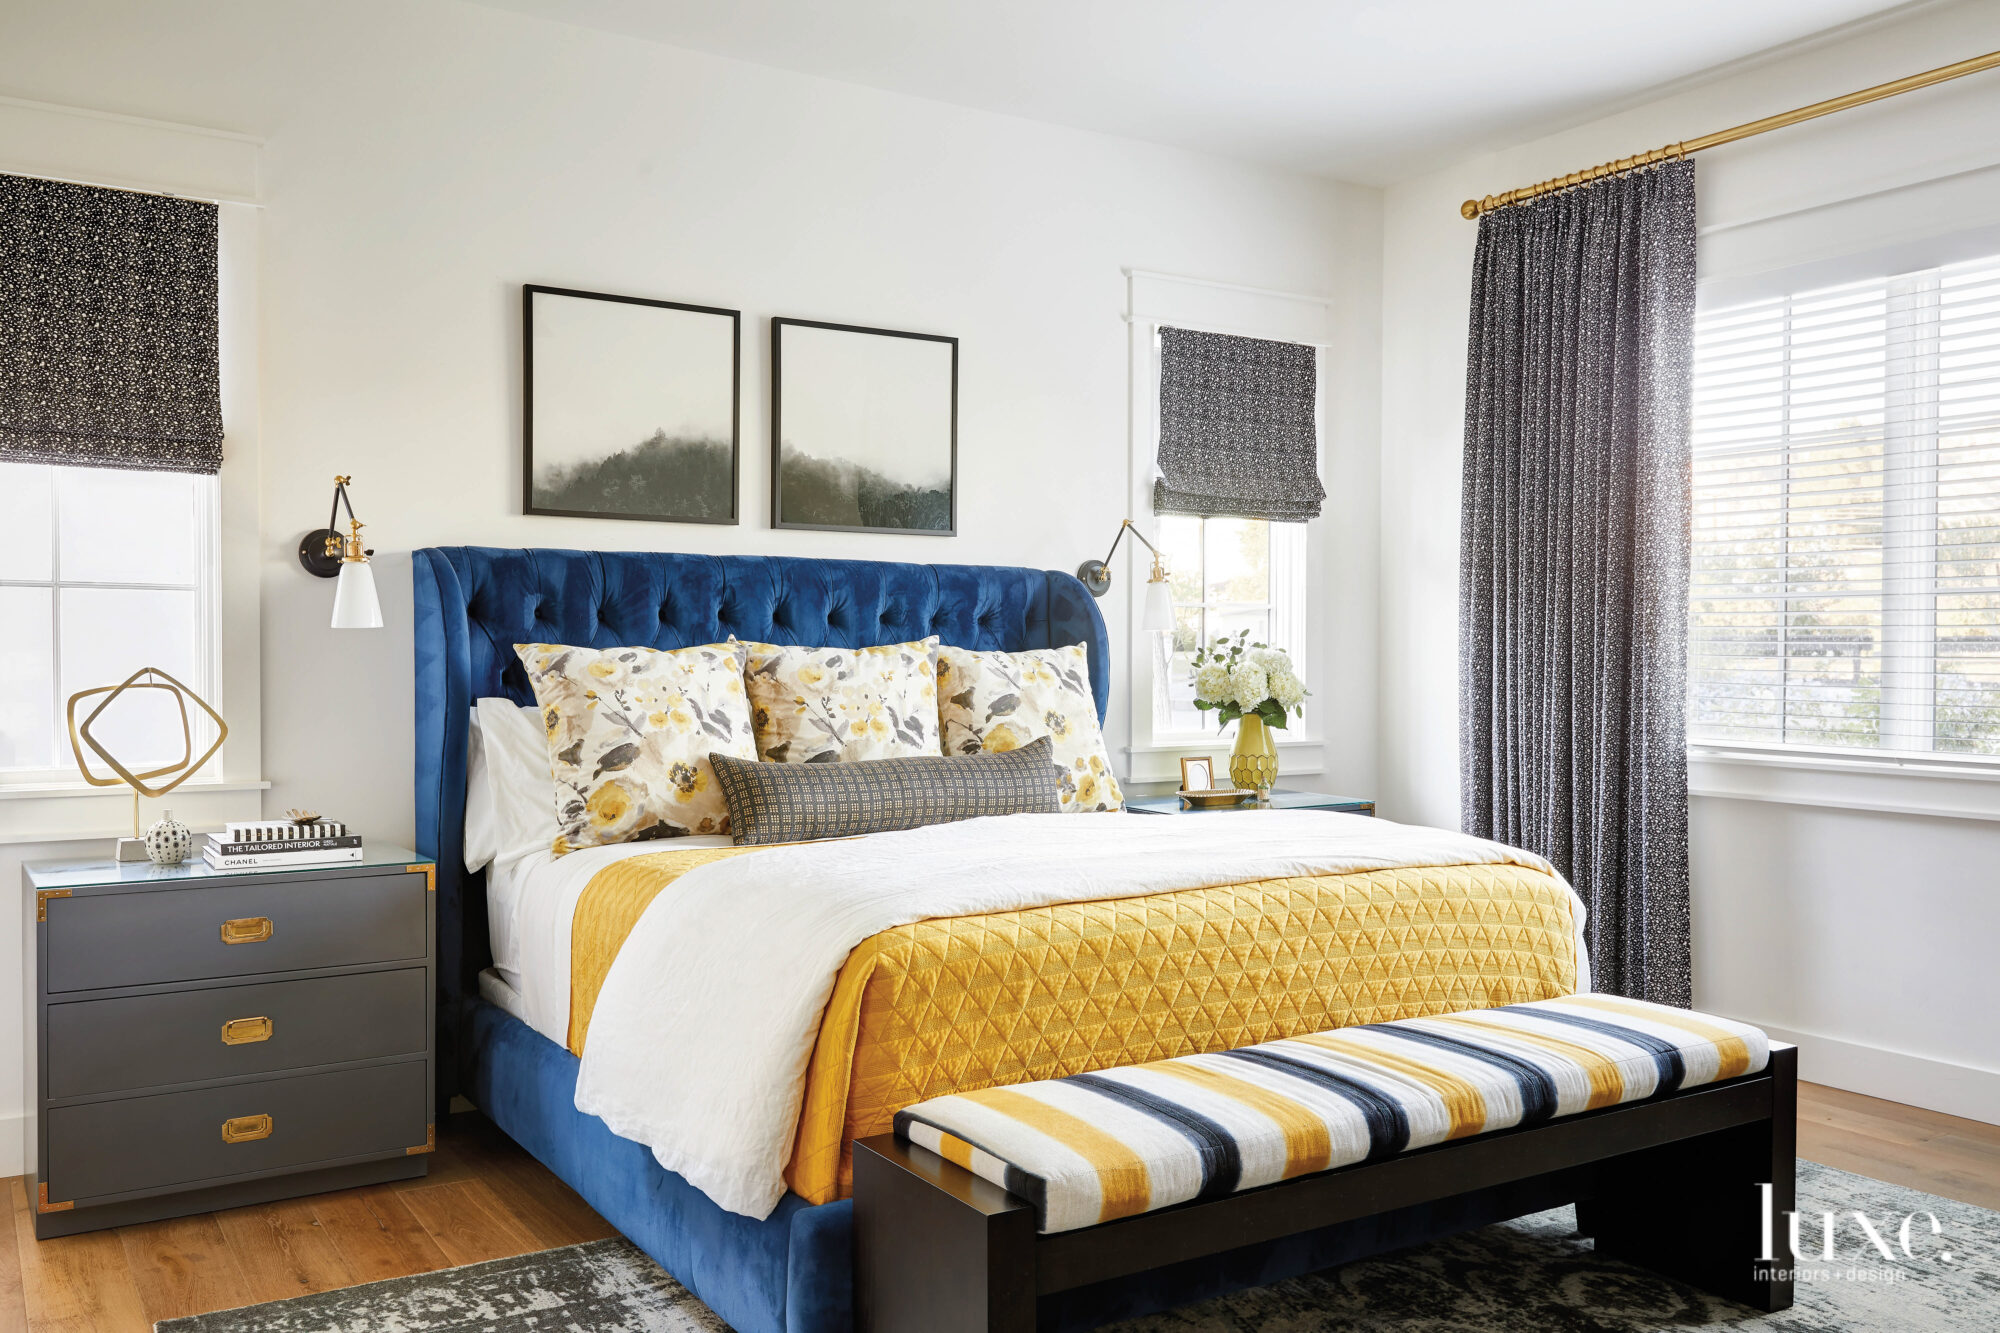 The bedroom has a blue velvet upholstered bed with yellow, blue and white linens.